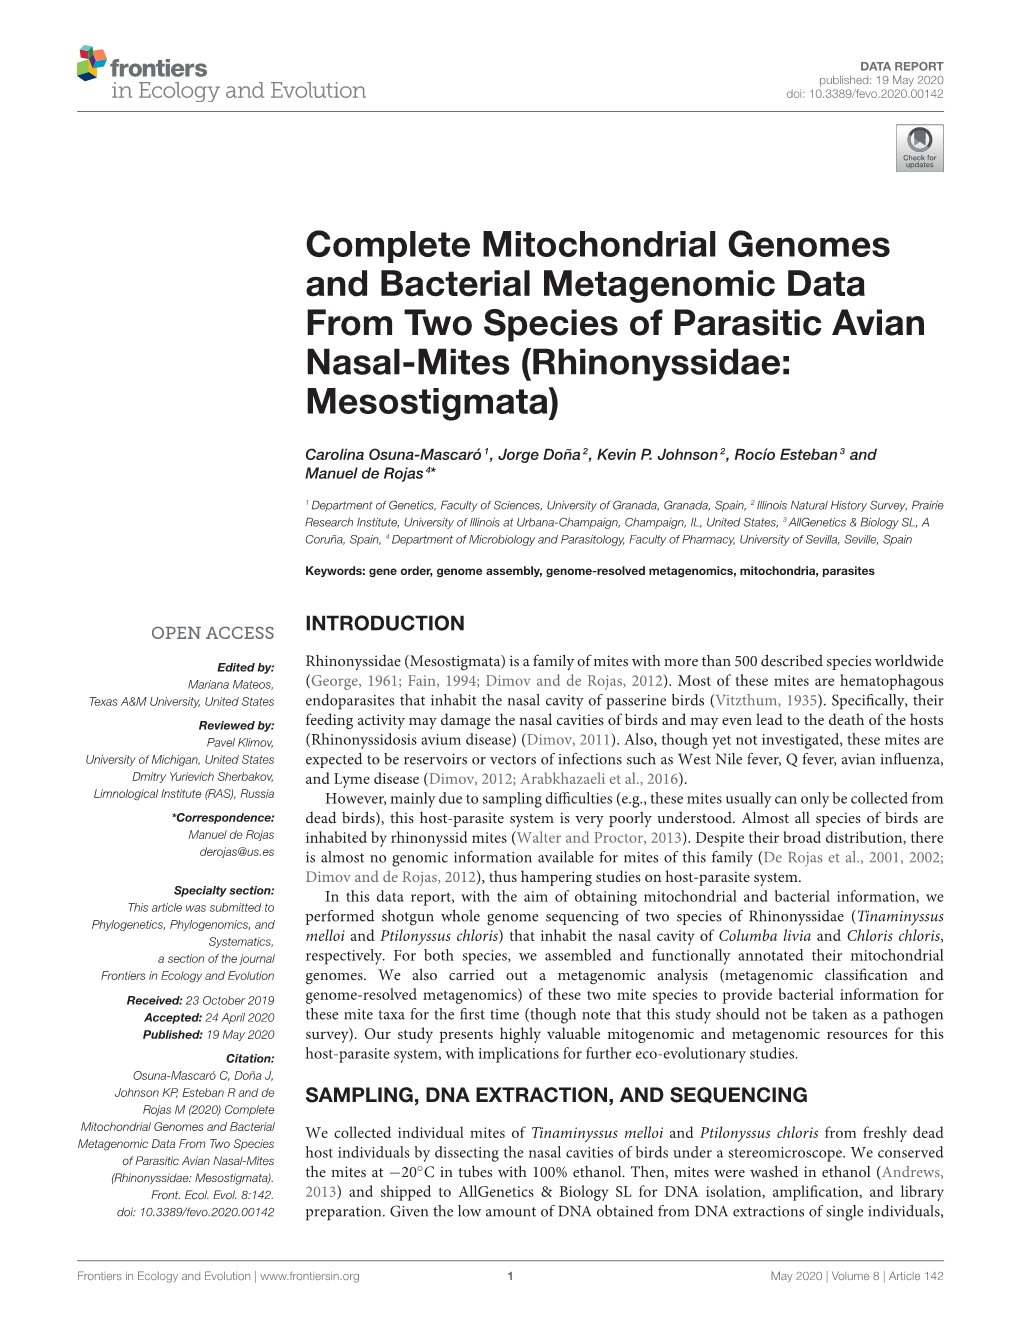 Complete Mitochondrial Genomes and Bacterial Metagenomic Data from Two Species of Parasitic Avian Nasal-Mites (Rhinonyssidae: Mesostigmata)